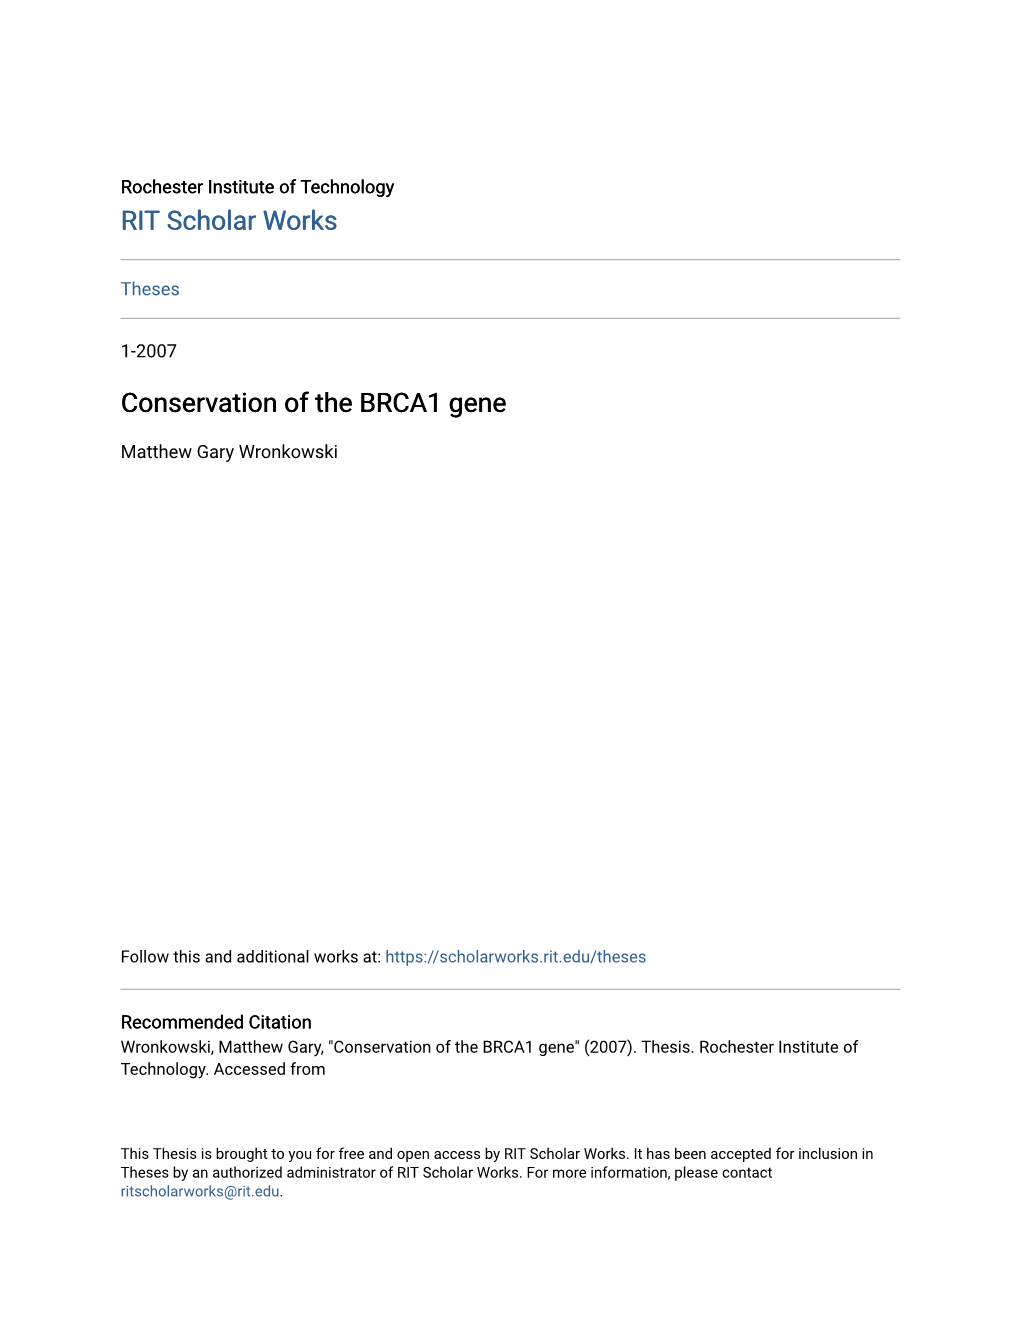 Conservation of the BRCA1 Gene